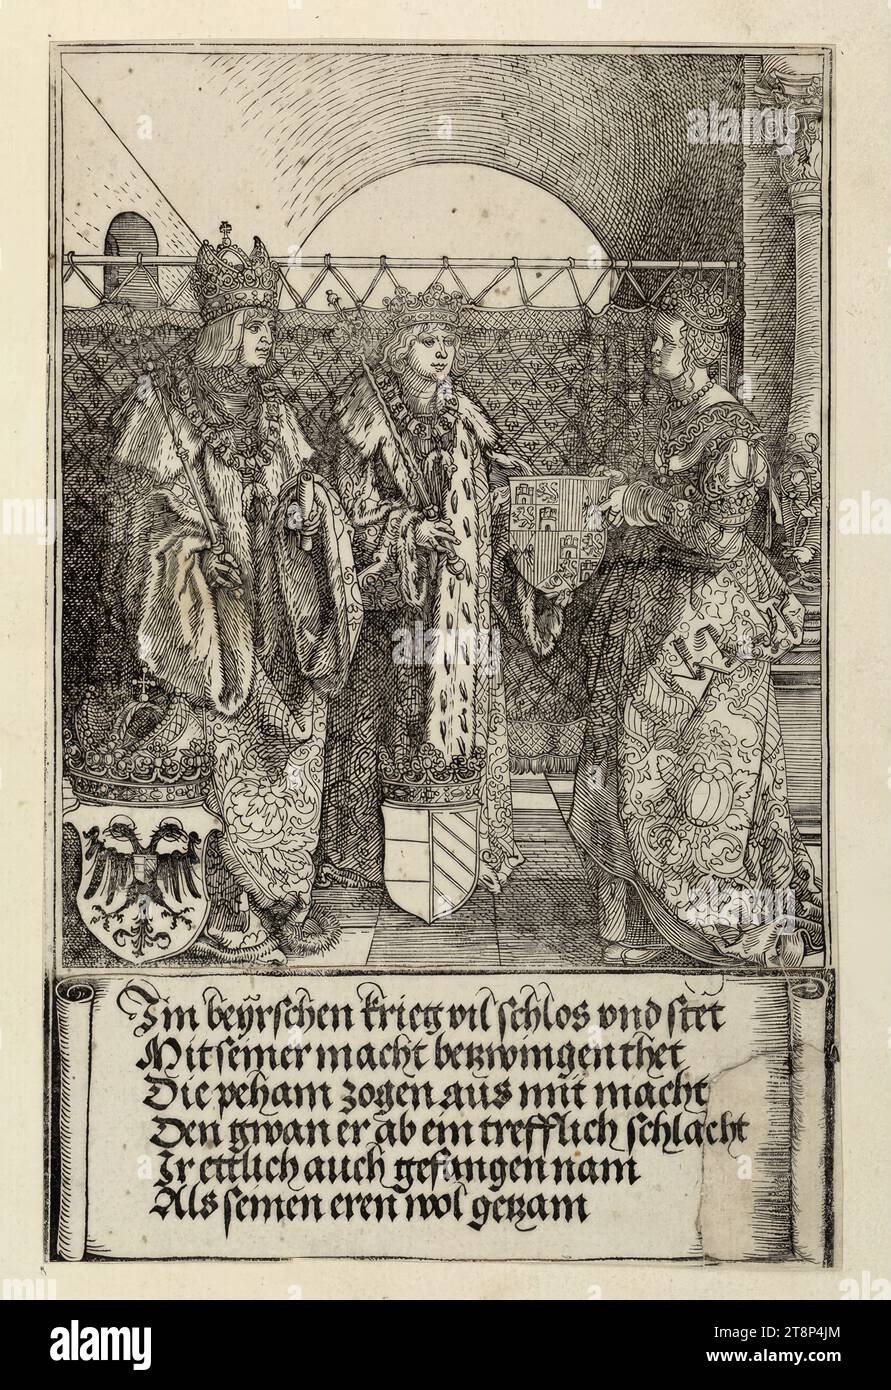 Spanish marriage of Philip in 1496 (The Arch of Honor of Emperor Maximilian I, history, C' 2.3), The Arch of Honor of Emperor Maximilian I, Albrecht Dürer (Nuremberg 1471 - 1528 Nuremberg), 1515 (1st edition Nuremberg 1517-1518), print, woodcut Stock Photo